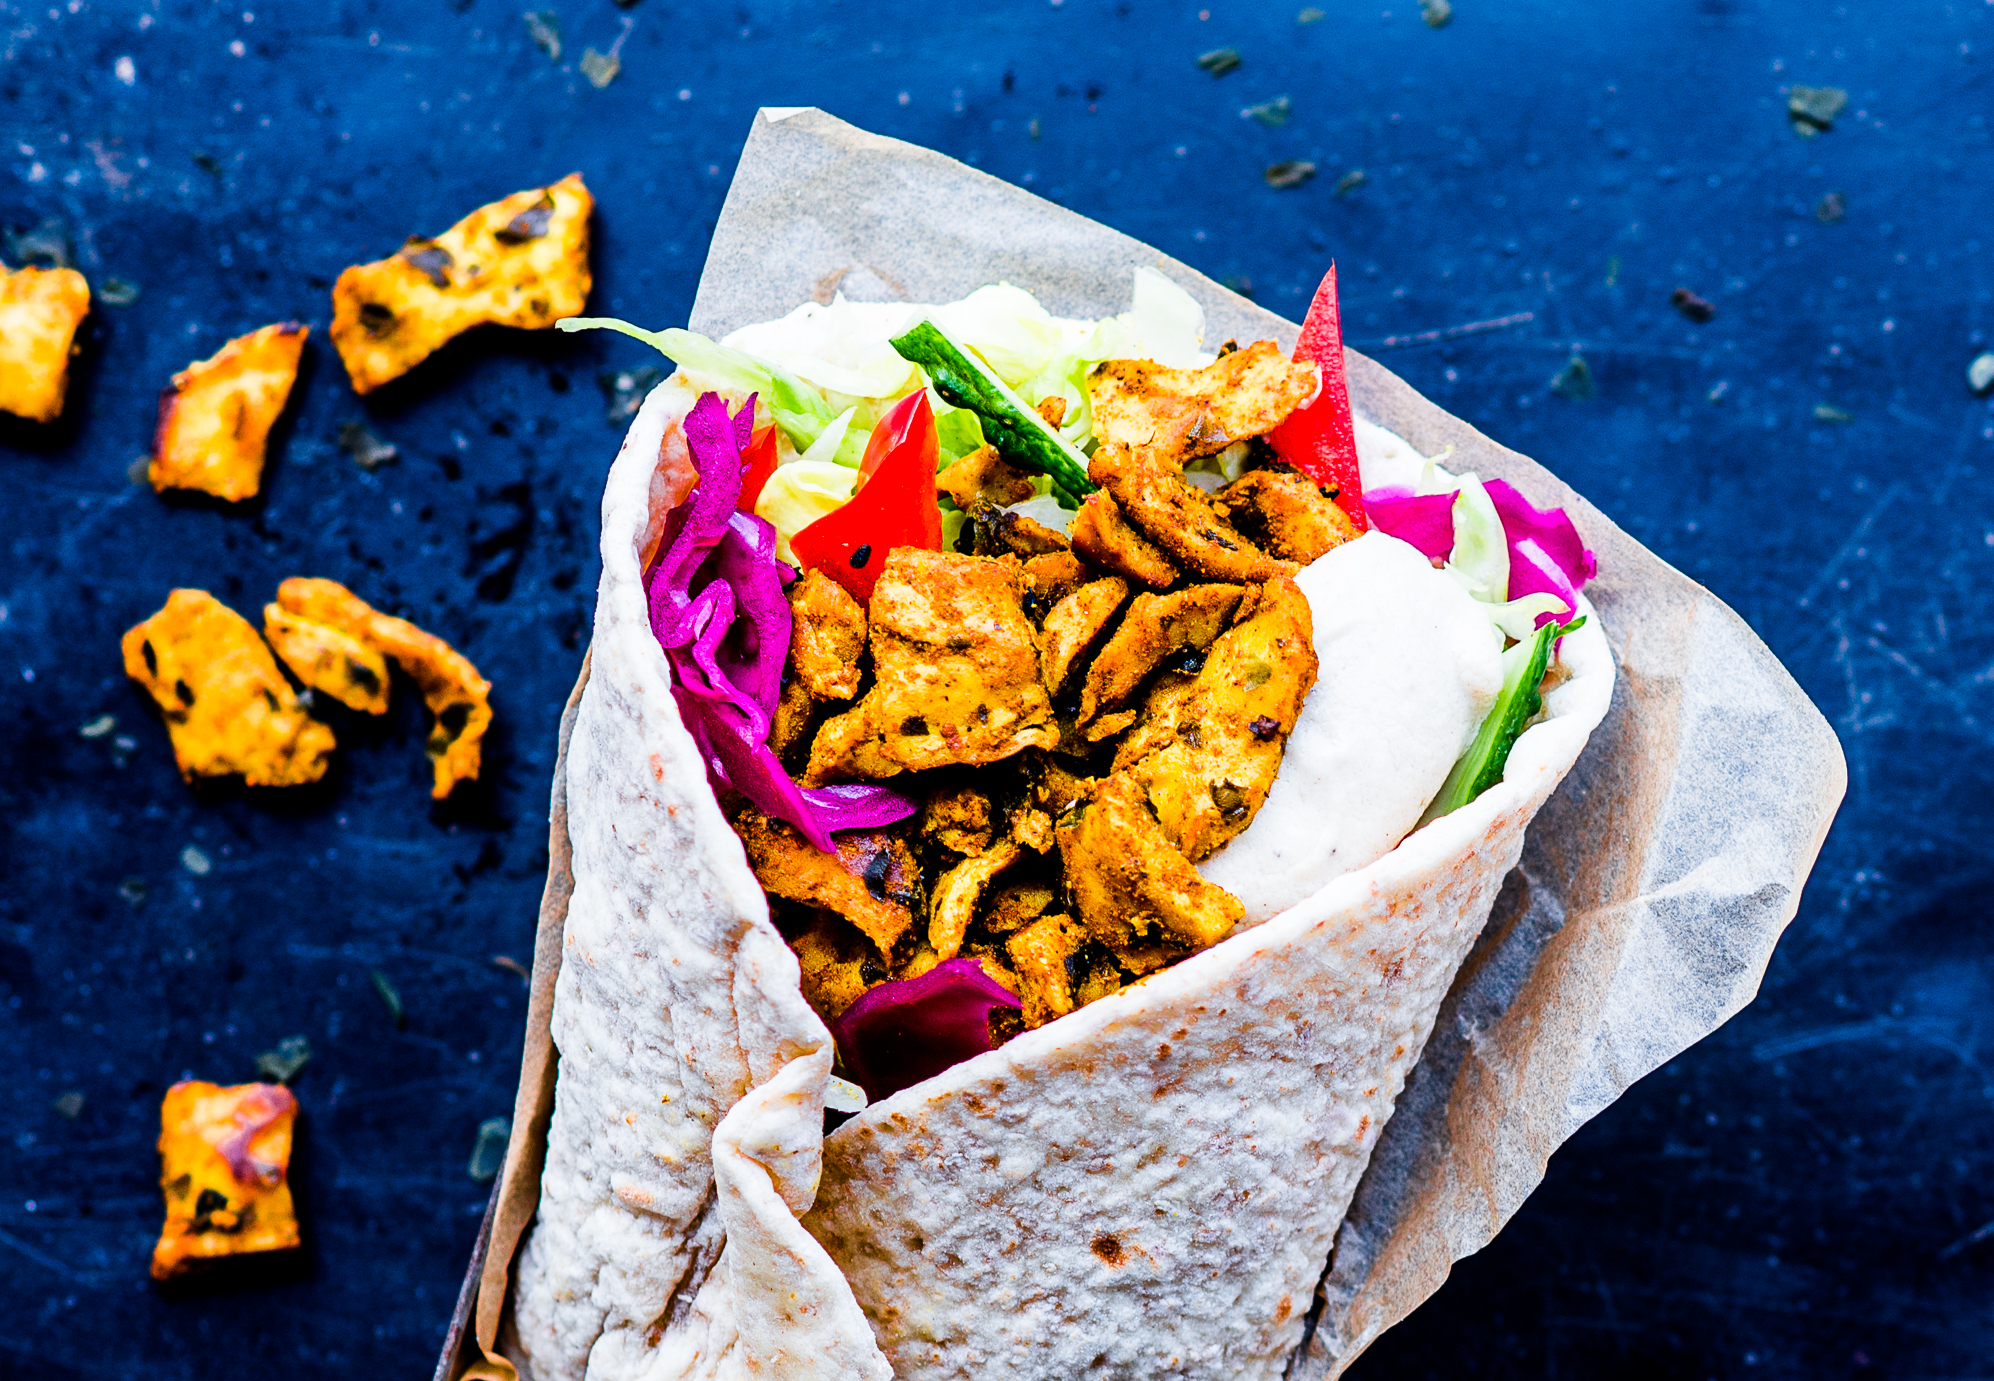 Shawarma from the sea! With flatbread and delicious (vegan!) sauce.